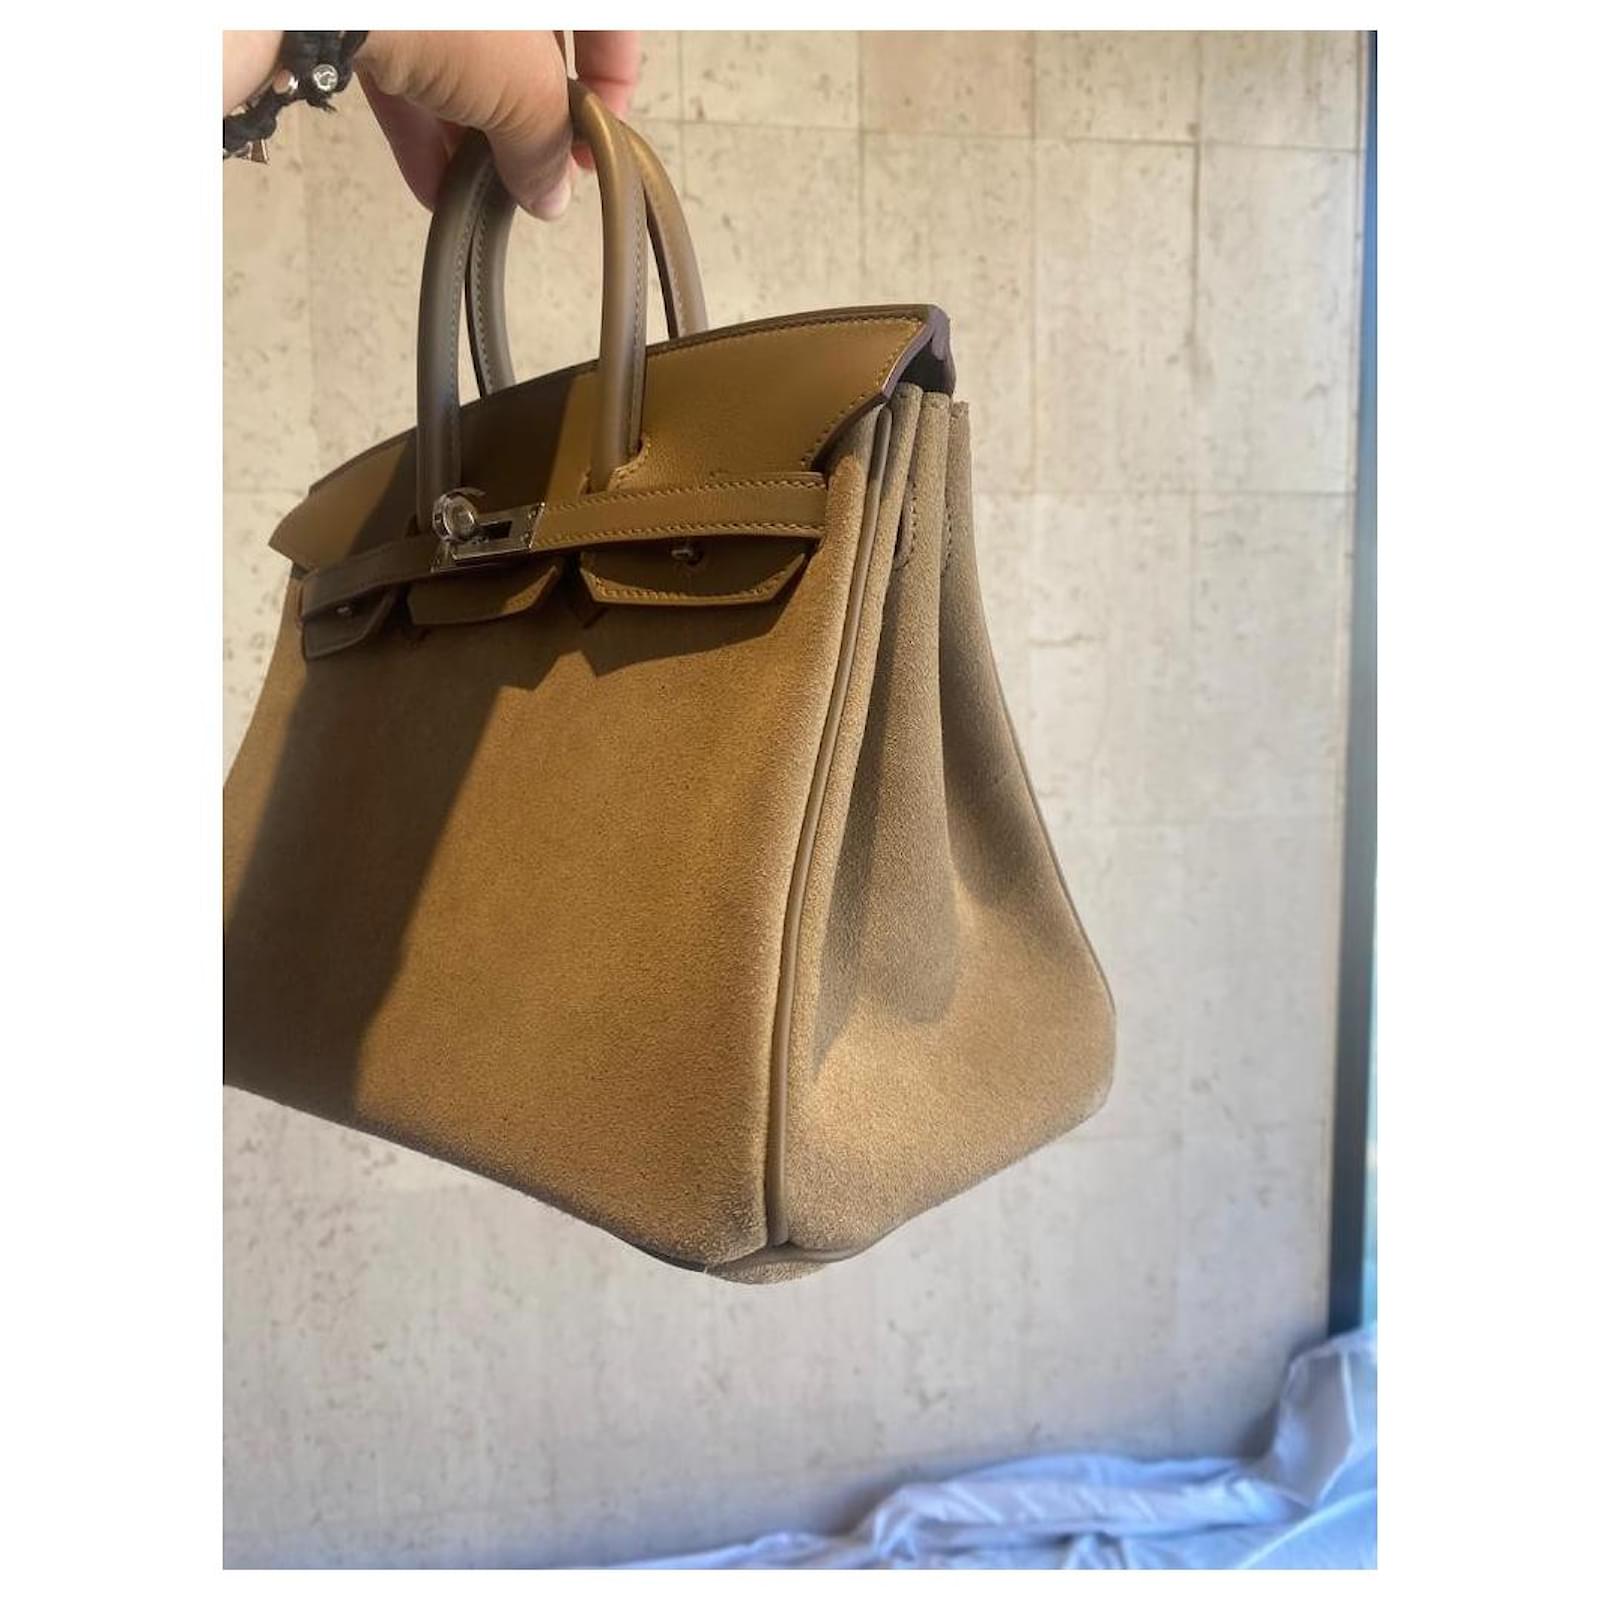 Hermes Birkin Handbag Brown Grizzly and Swift with Gold Hardware